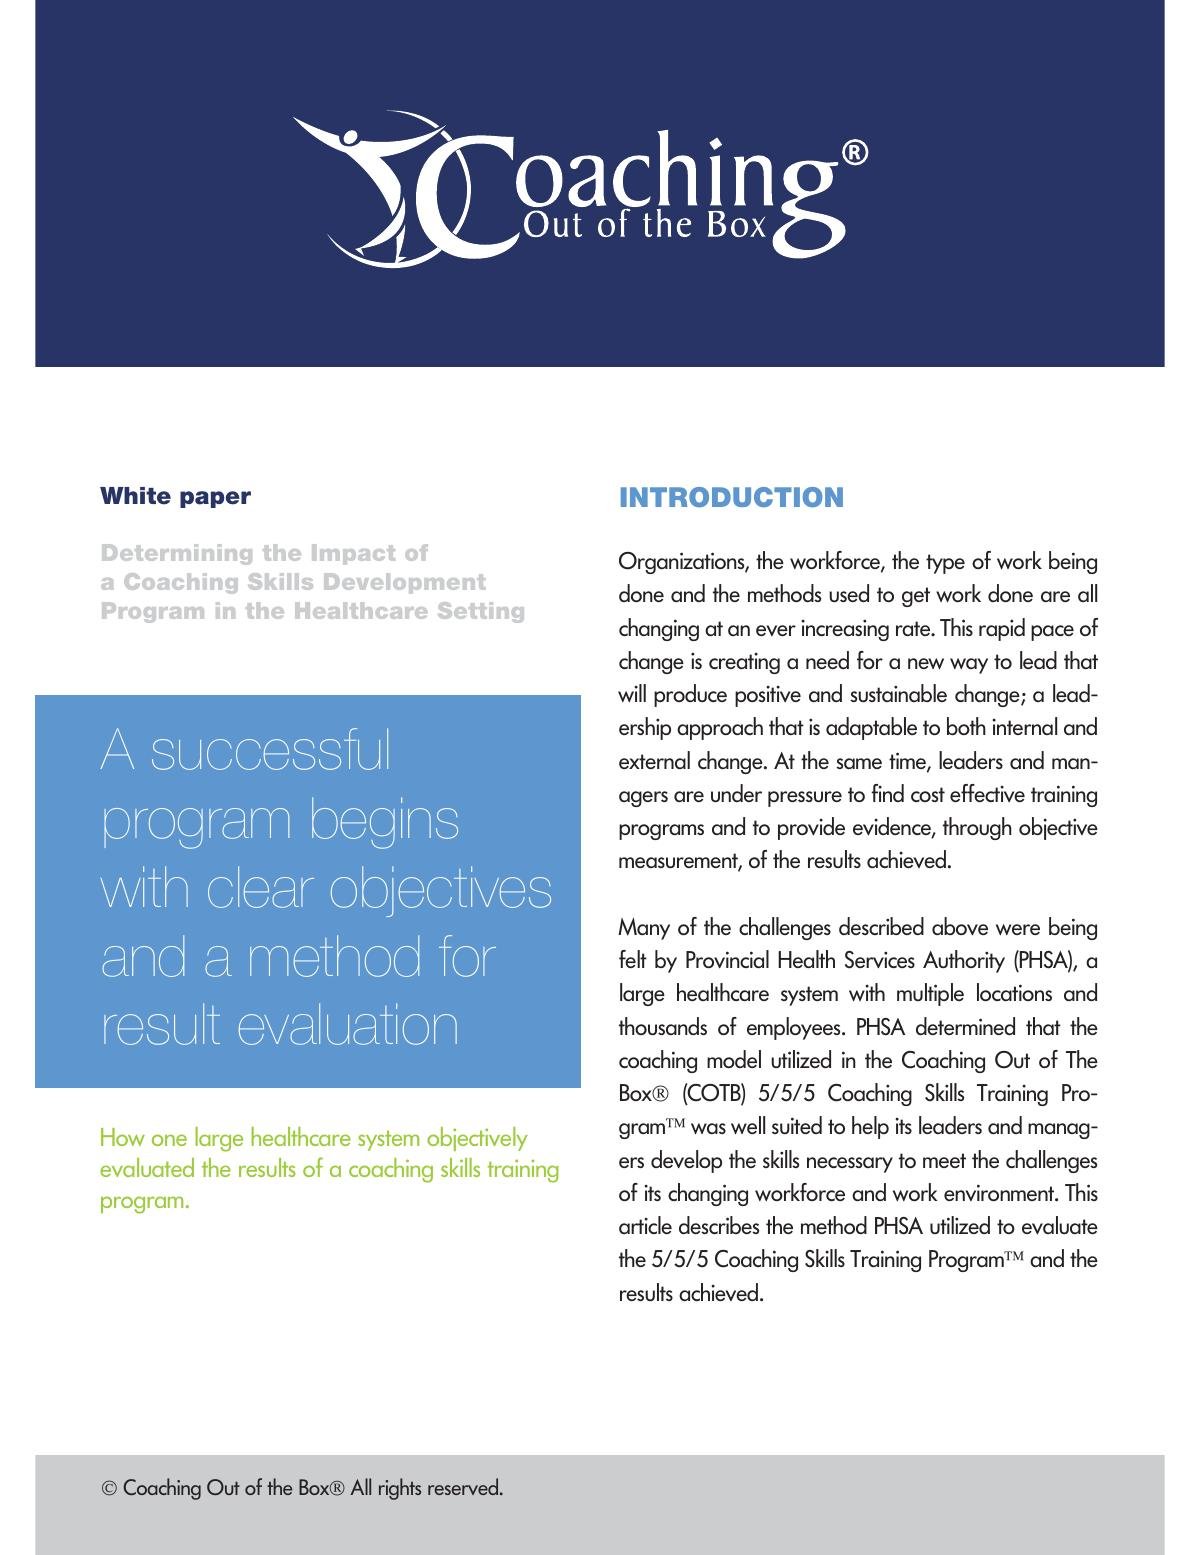 Determining the Impact of a Coaching Skills Development  Program in the Healthcare Setting